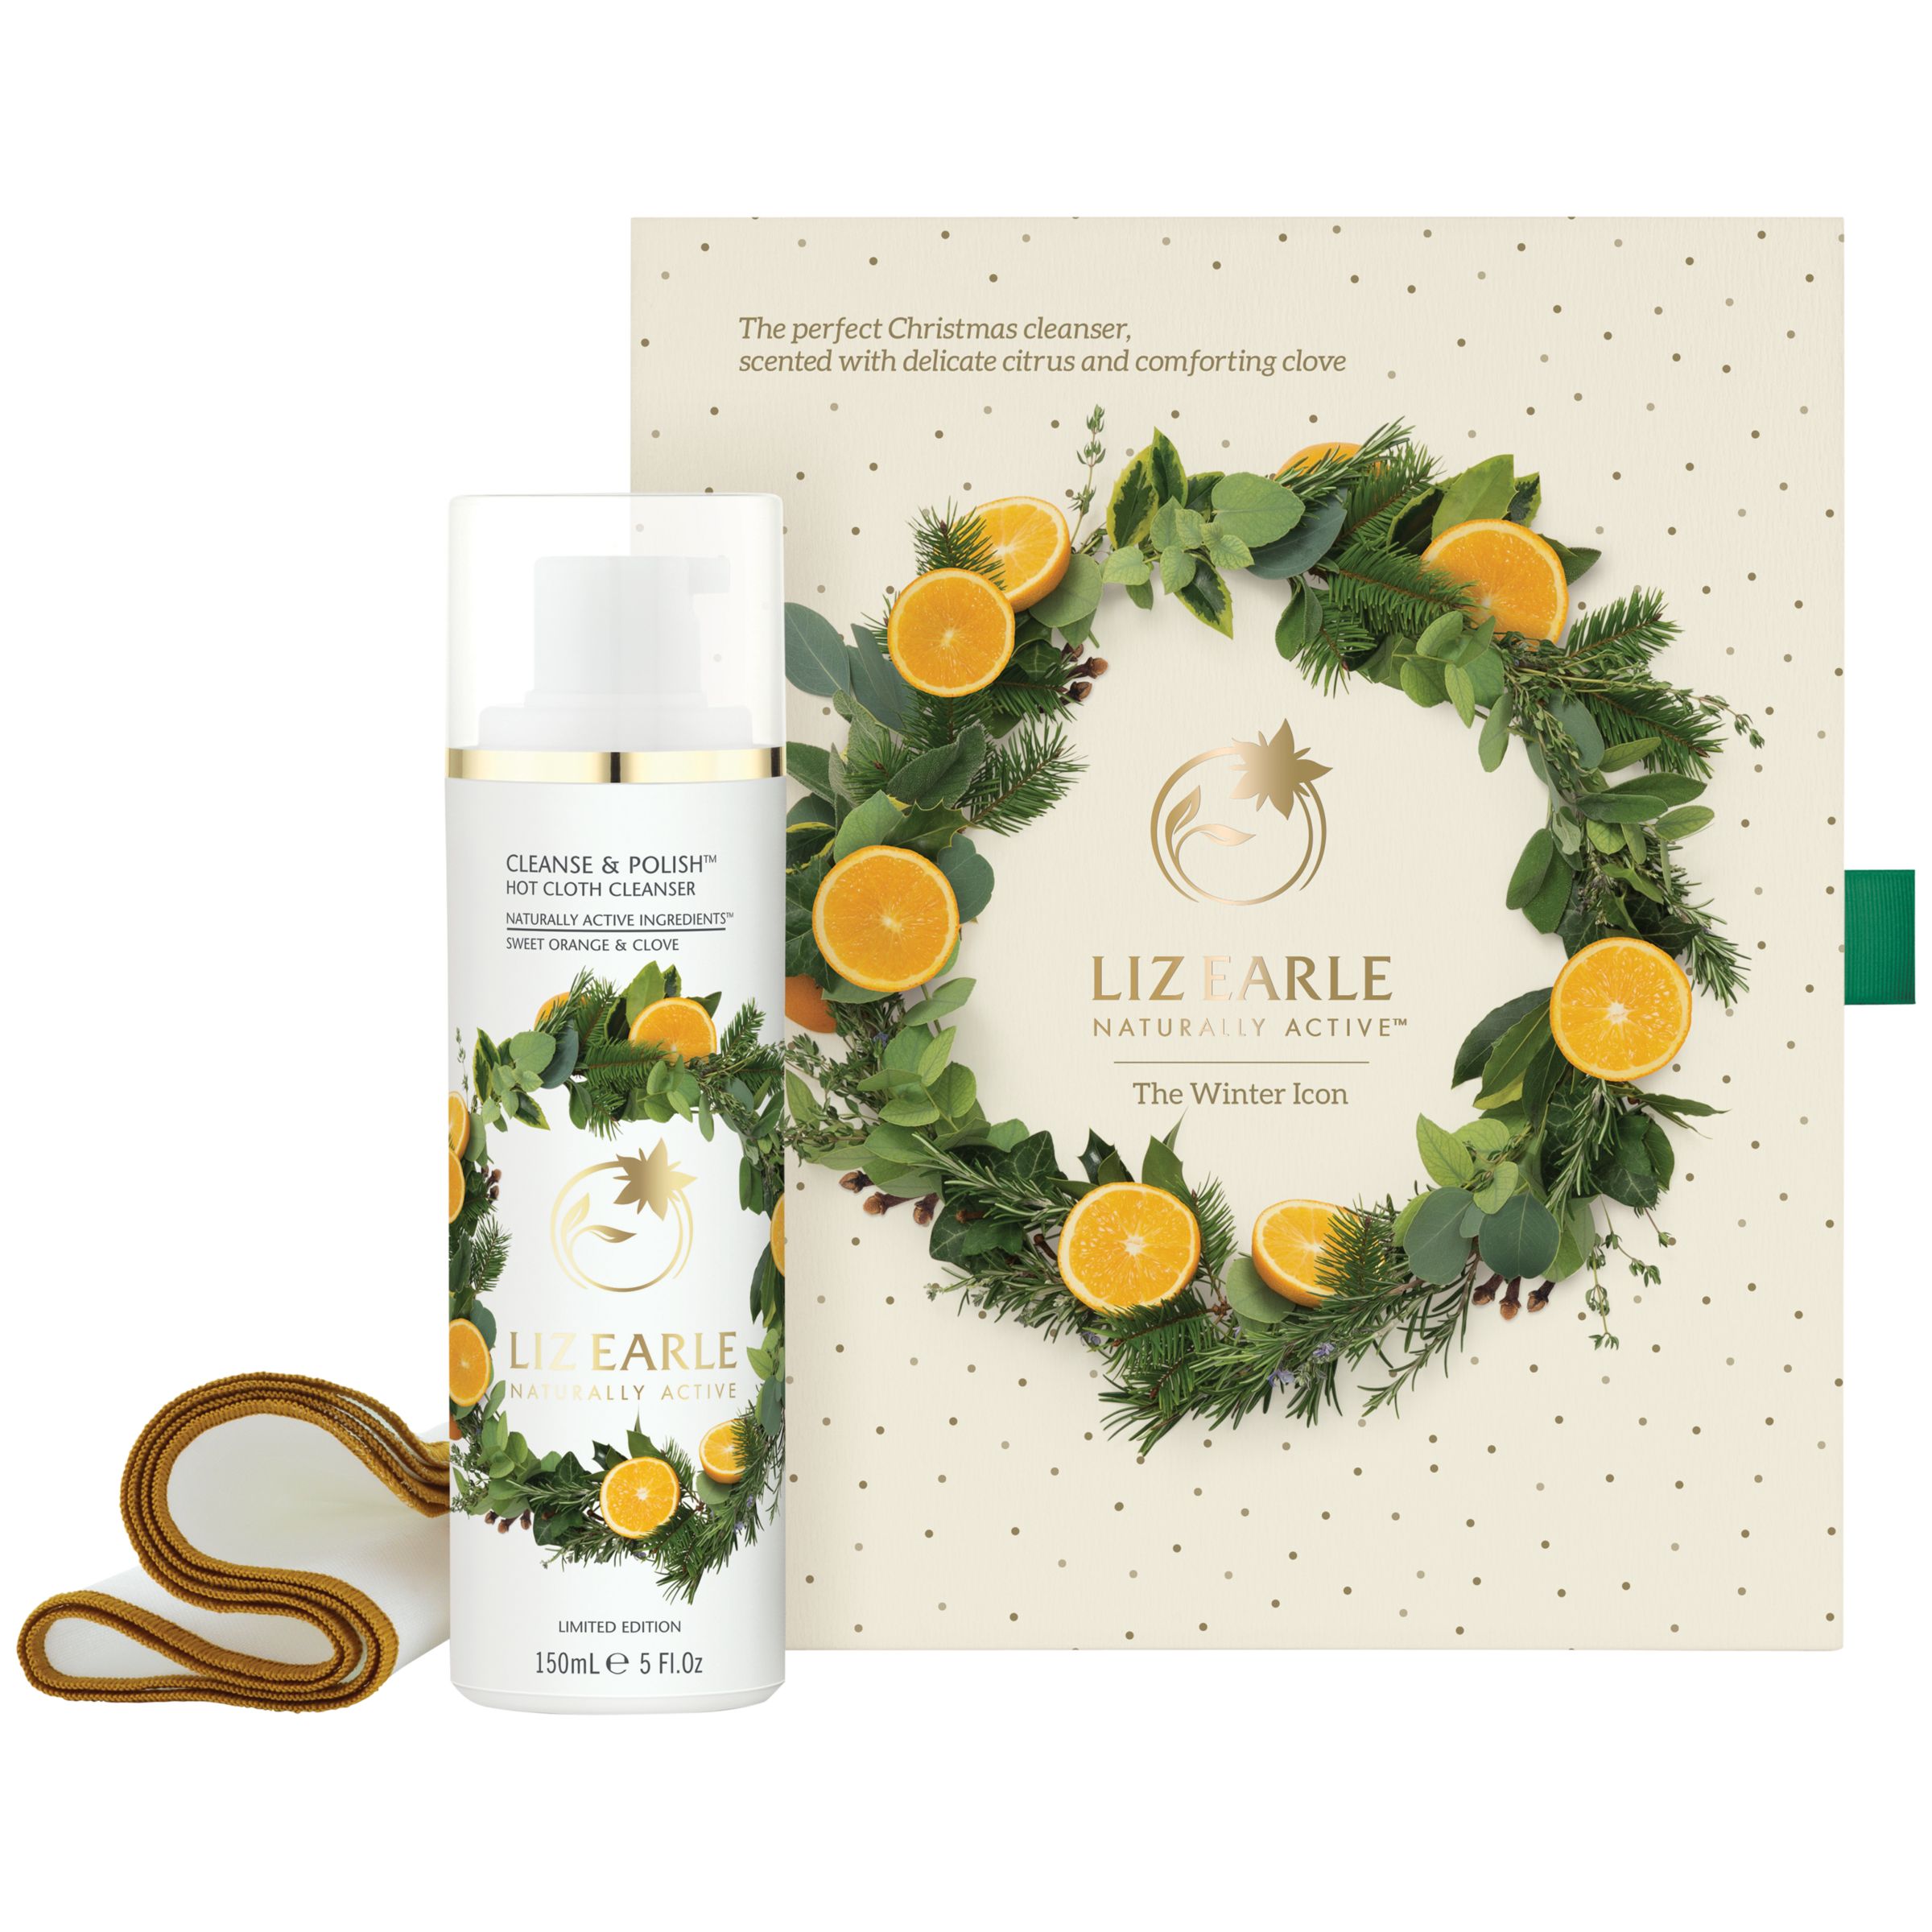 Liz Earle The Winter Icon Cleanse And Polish™ Hot Cloth Cleanser Sweet